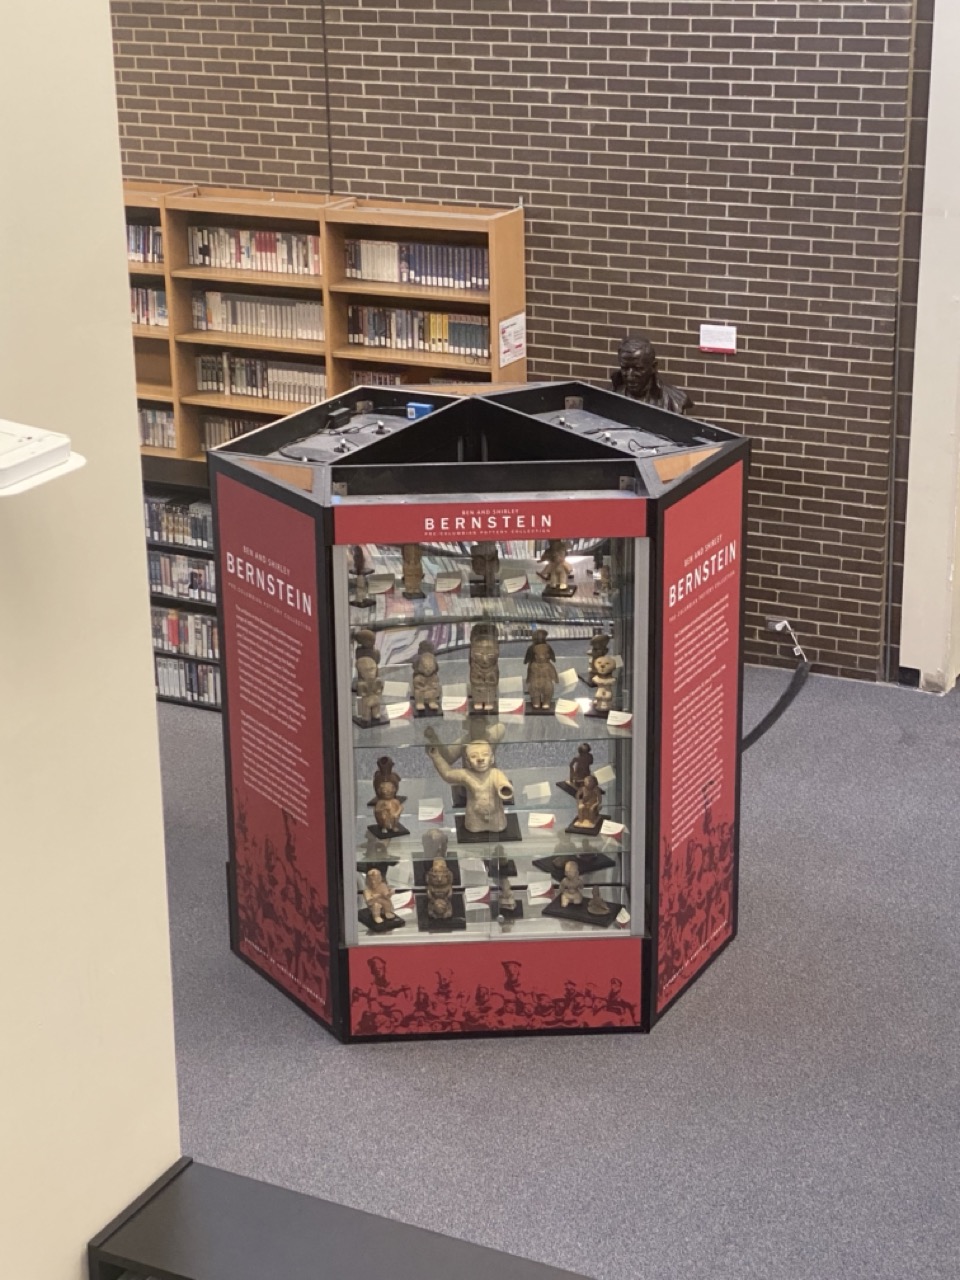 Six-sided installation of 3 glass cases holding replicas of Ecuadorian pottery and 3 sides of texts on red walls